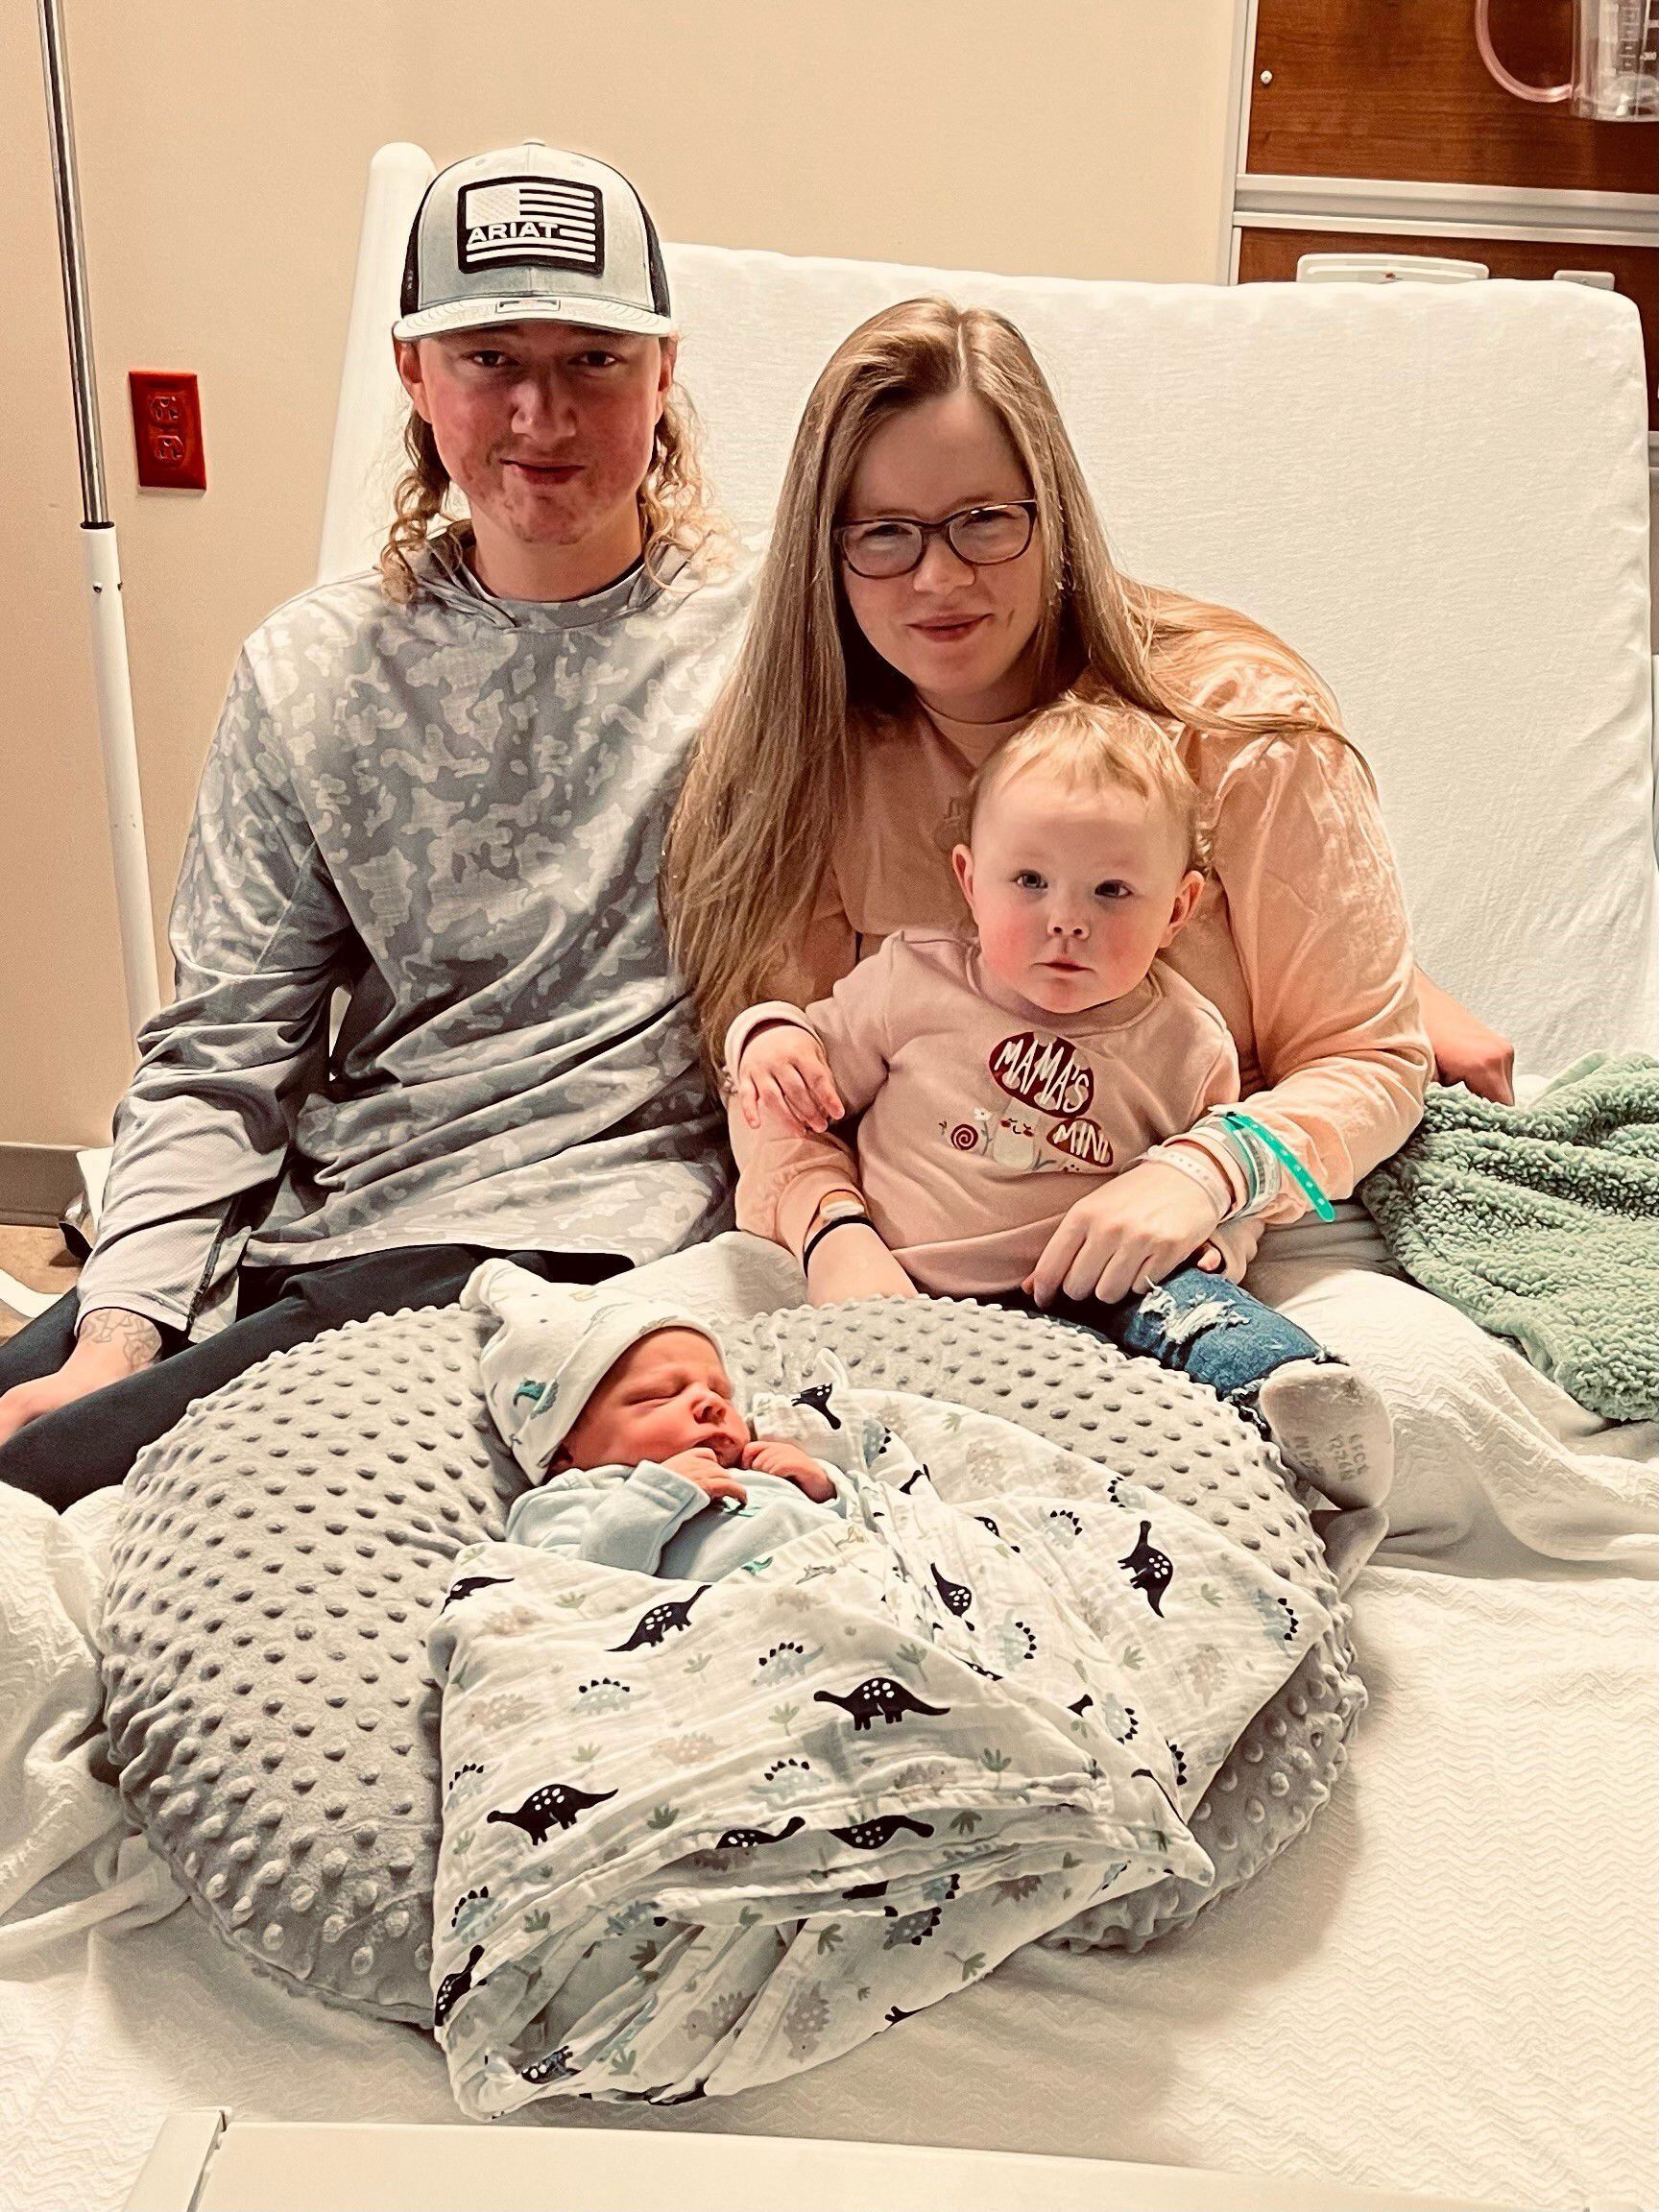 News - Riverside Welcomes First Baby of 2021